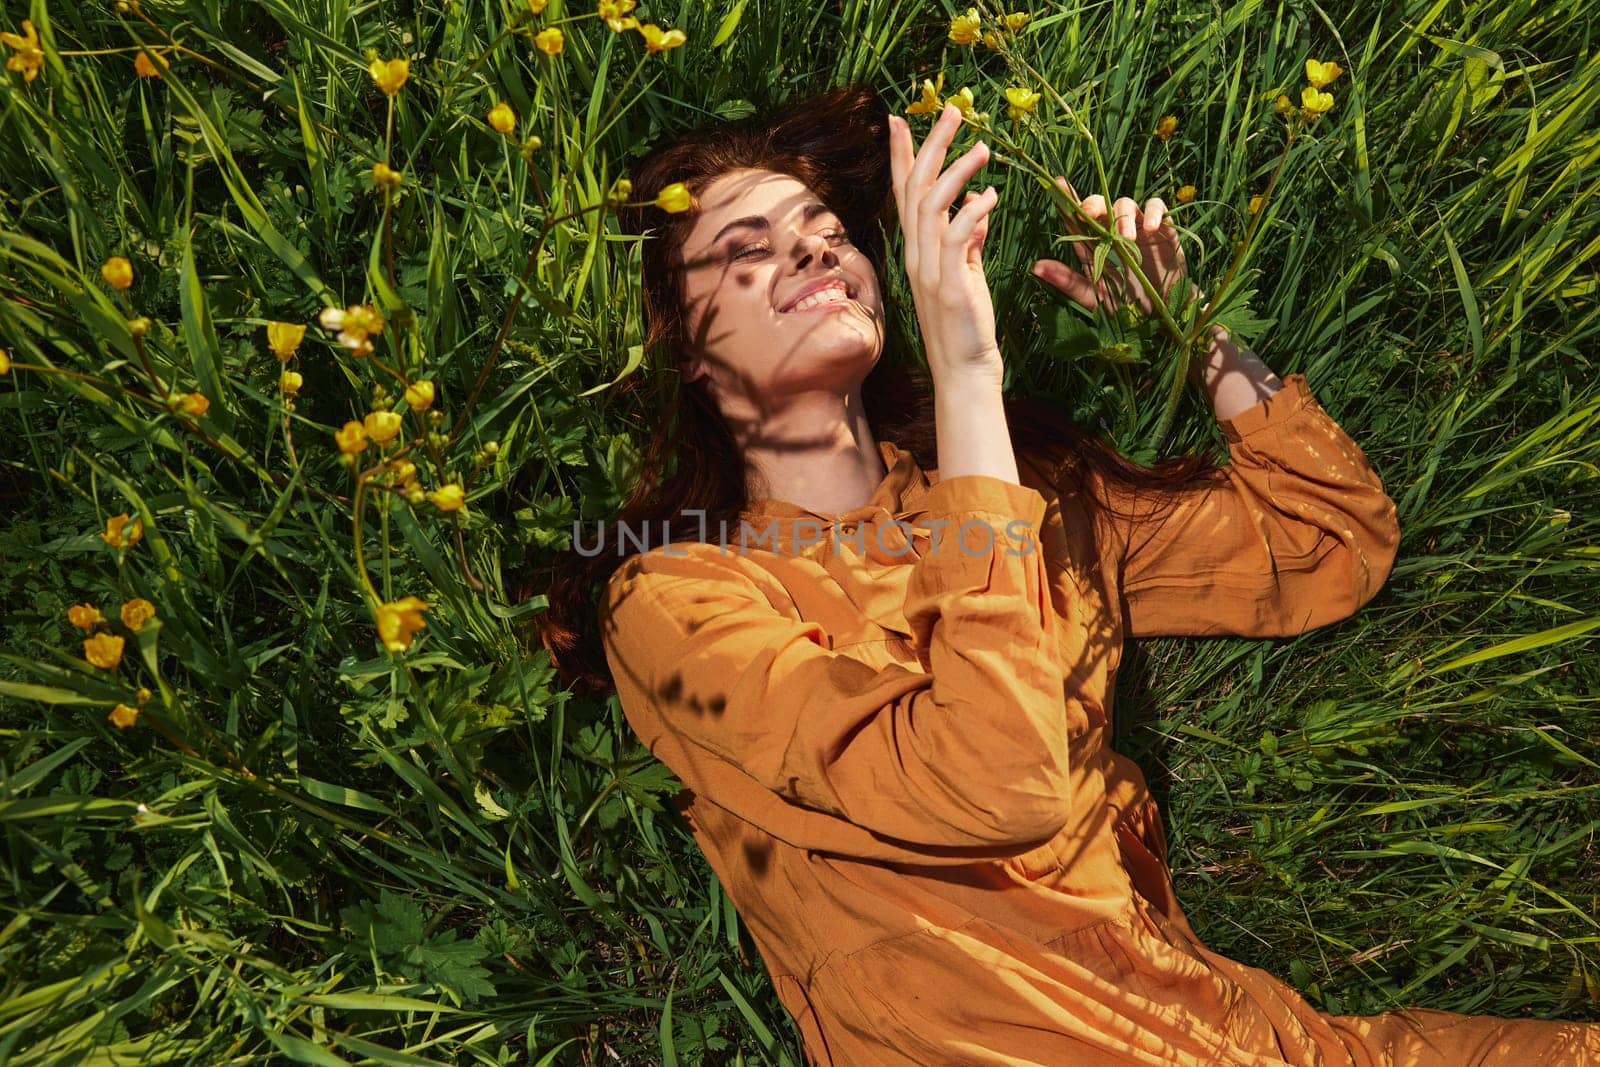 a calm woman with long red hair lies in a green field with yellow flowers, in an orange dress with her eyes closed, touching blades of grass with her hands, enjoying peace and recuperating by Vichizh